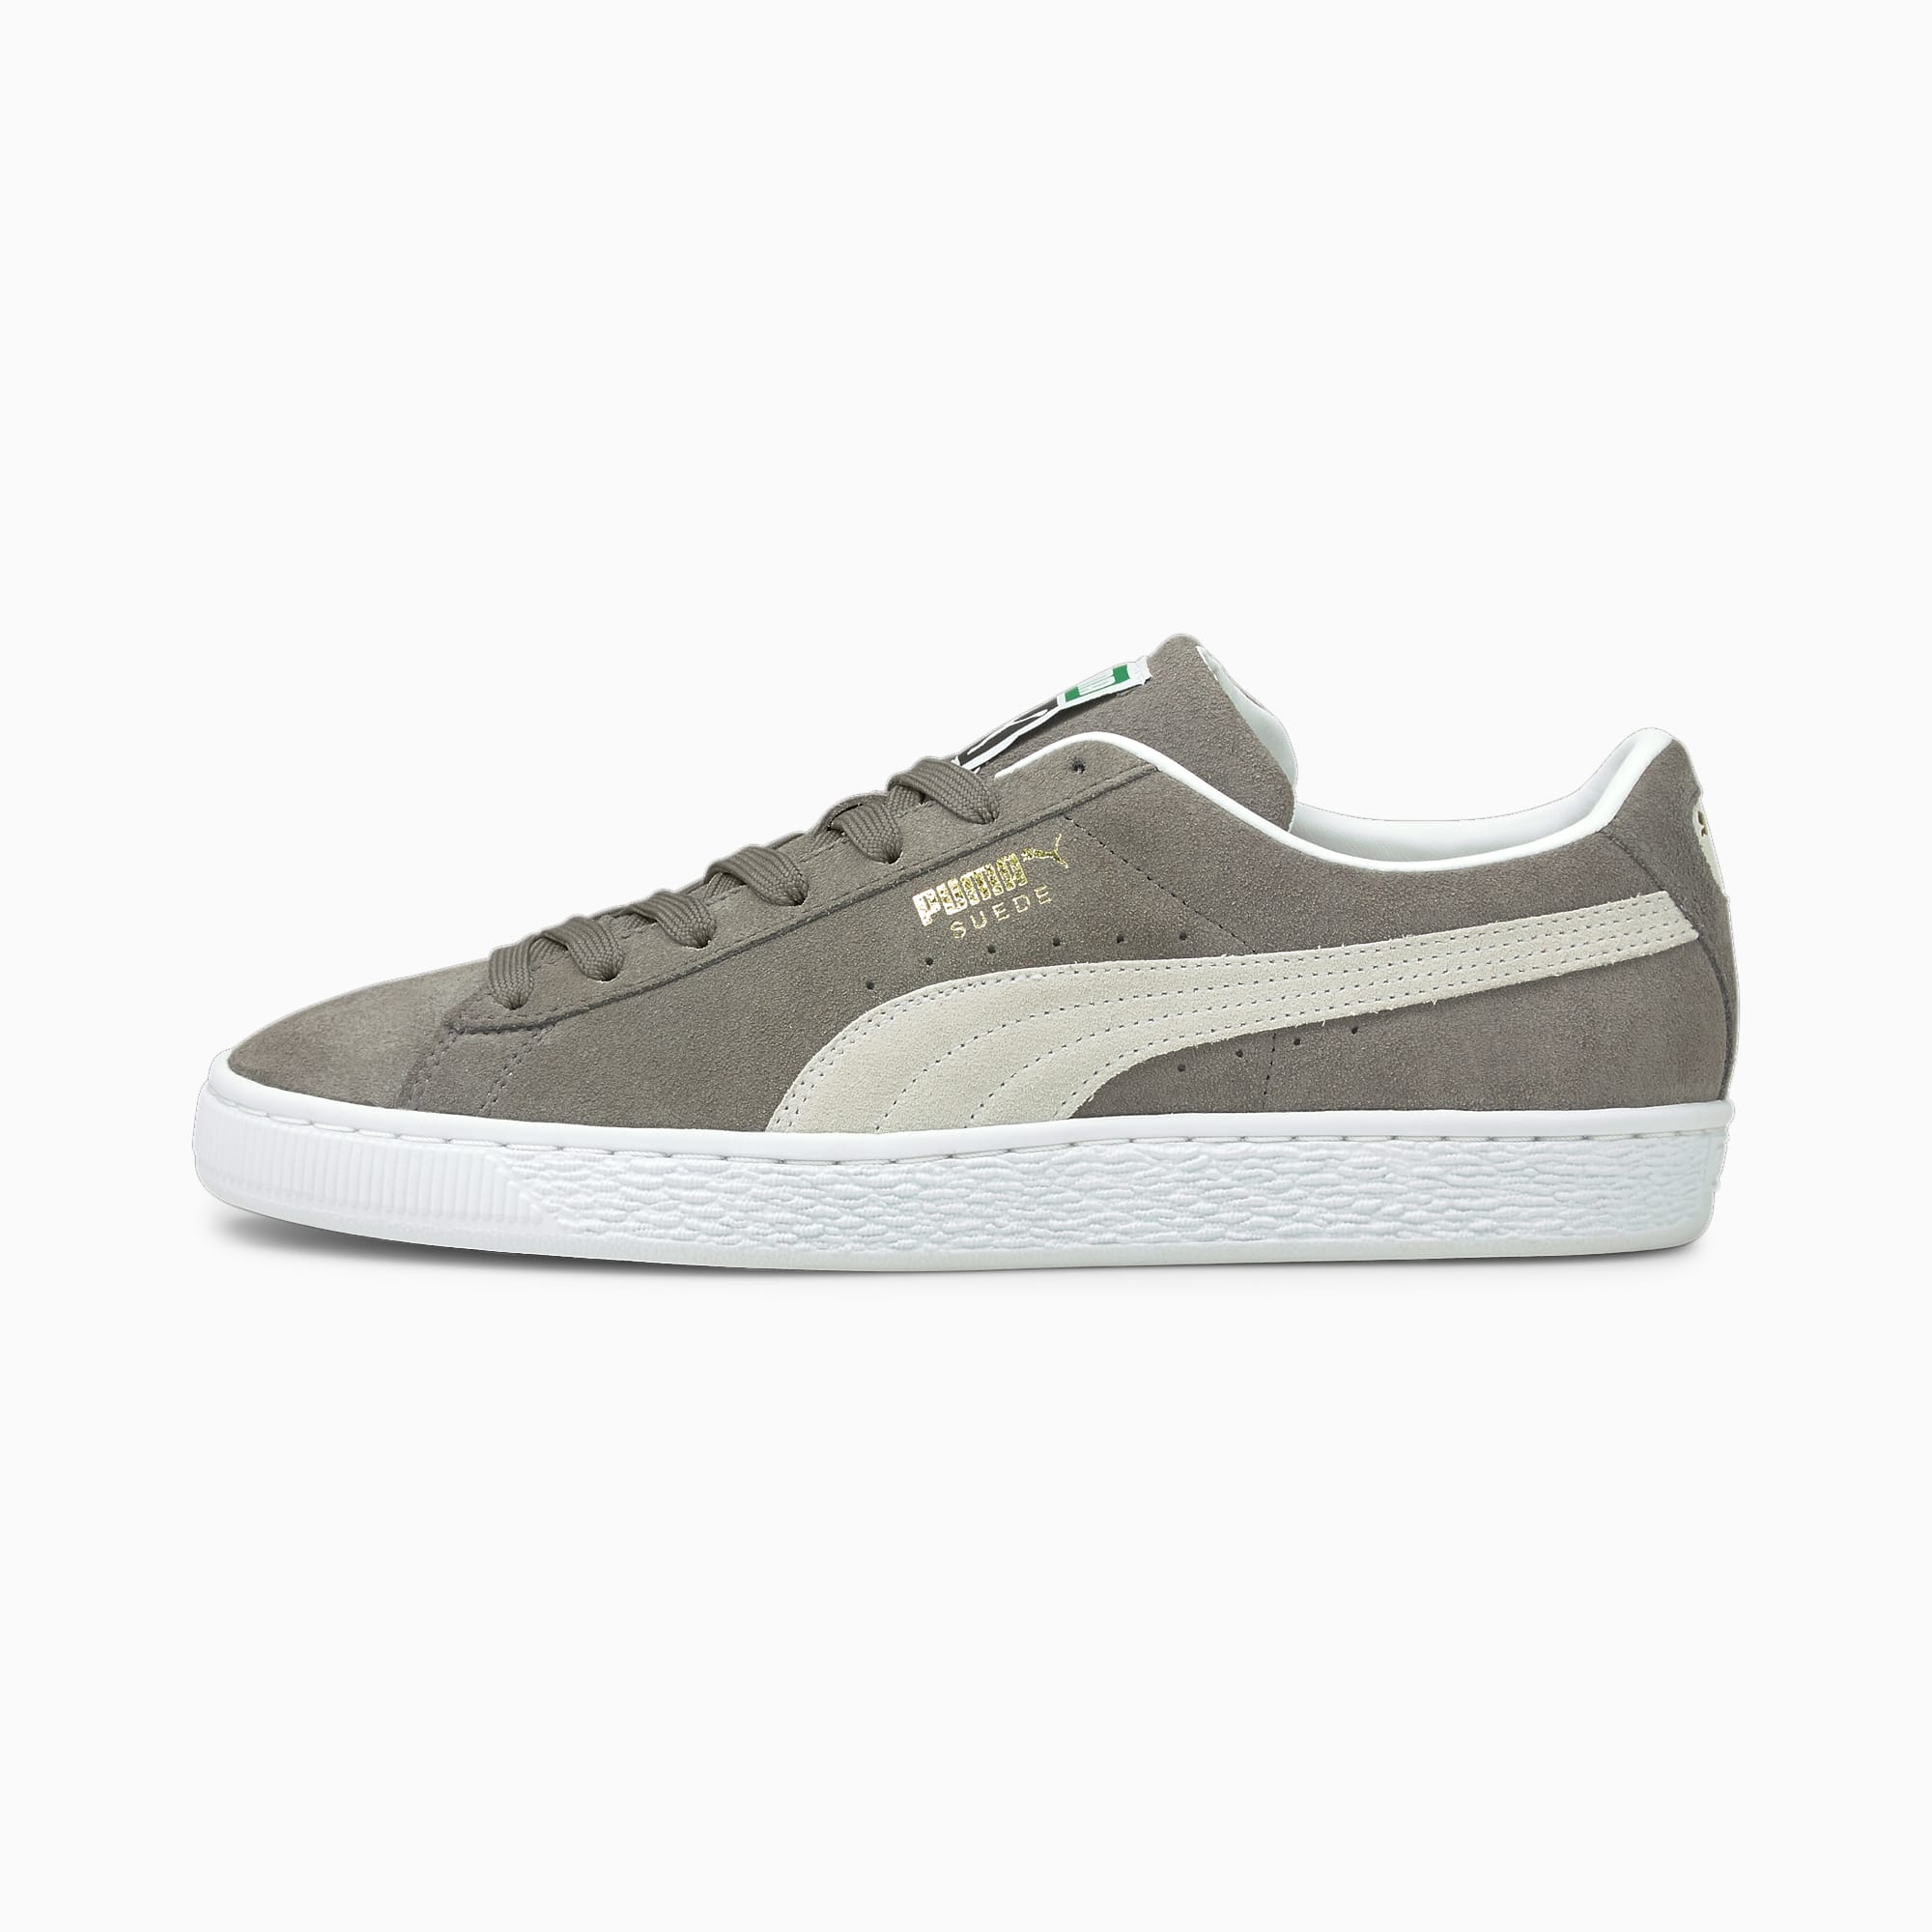 PUMA Chaussure Sneakers Suede Classic XXI Pour Homme, Gris/Blanc